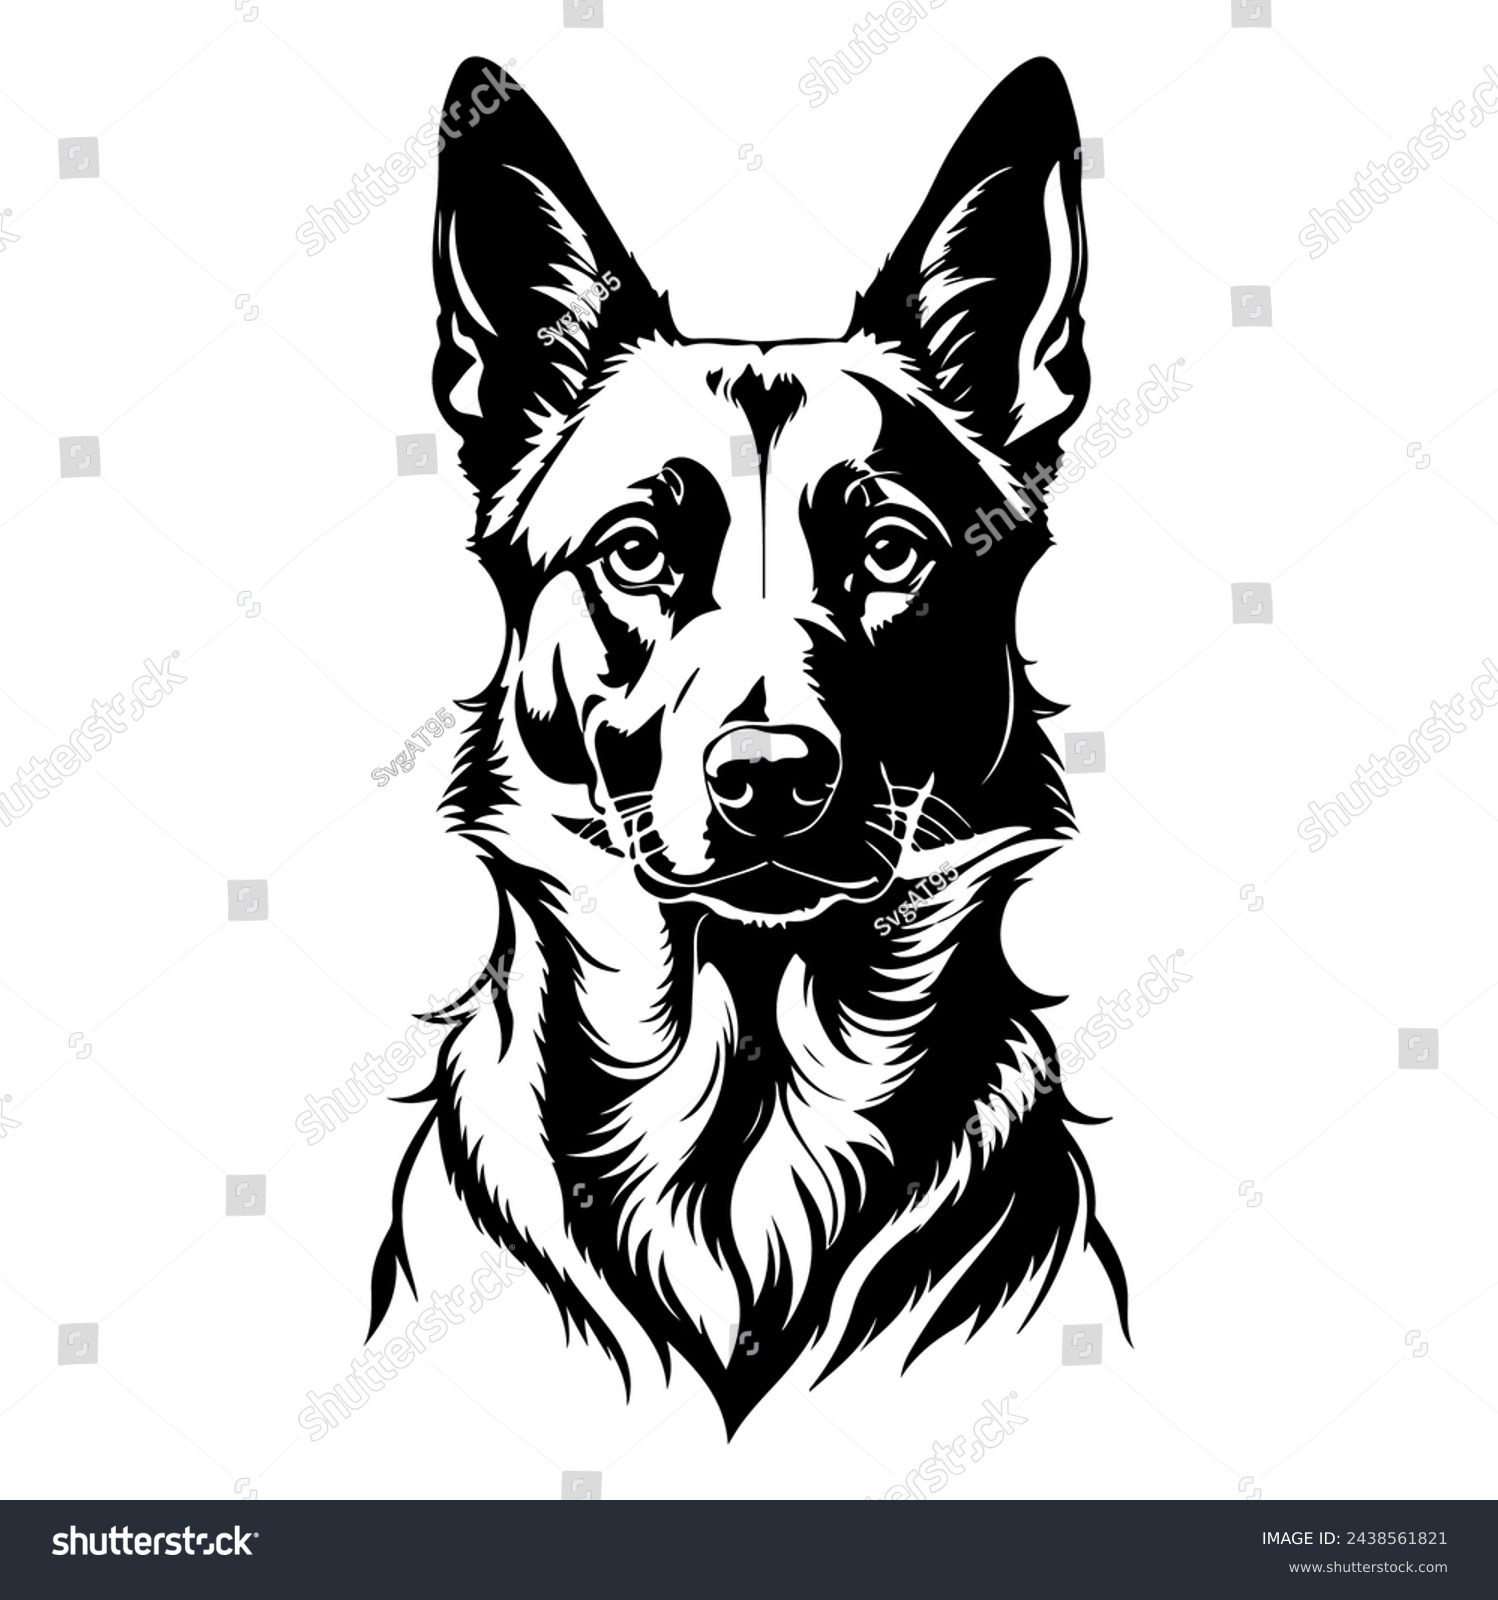 Portrait of a Belgian Malinois Dog Vector isolated on white background, Dog Silhouettes. #2438561821